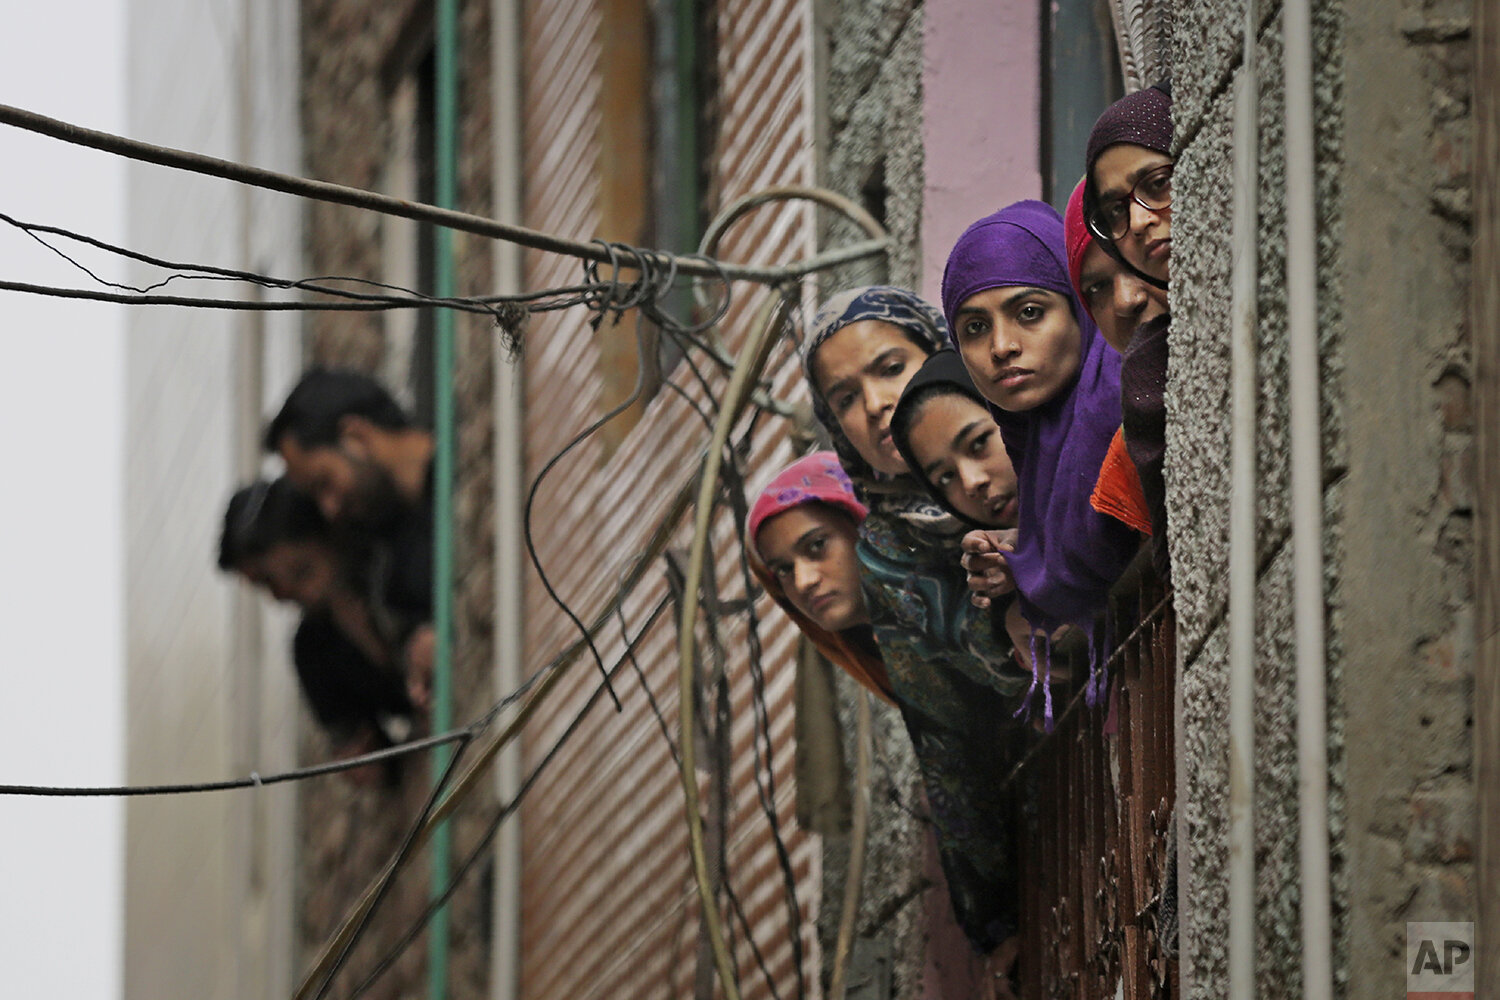  Indian Muslim women look out of a window as security officers patrol a street in New Delhi, India, Wednesday, Feb. 26, 2020. At least 20 people were killed in three days of clashes in New Delhi, with the death toll expected to rise as hospitals were